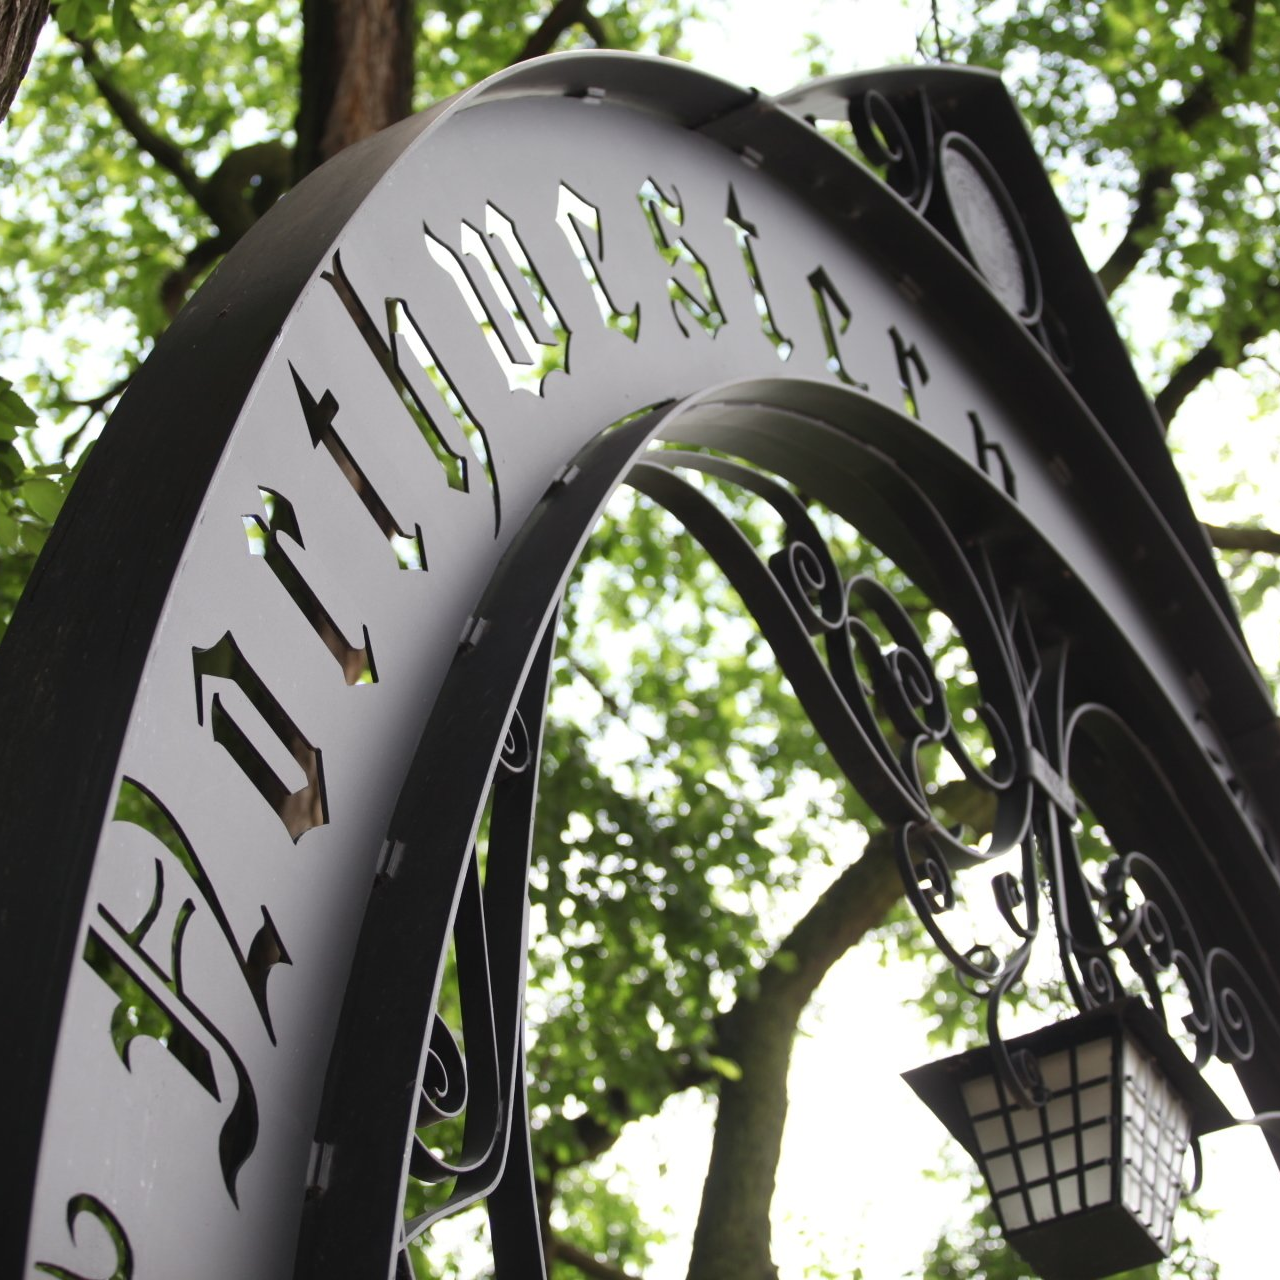 Photograph of the Weber Arch at Northwestern University